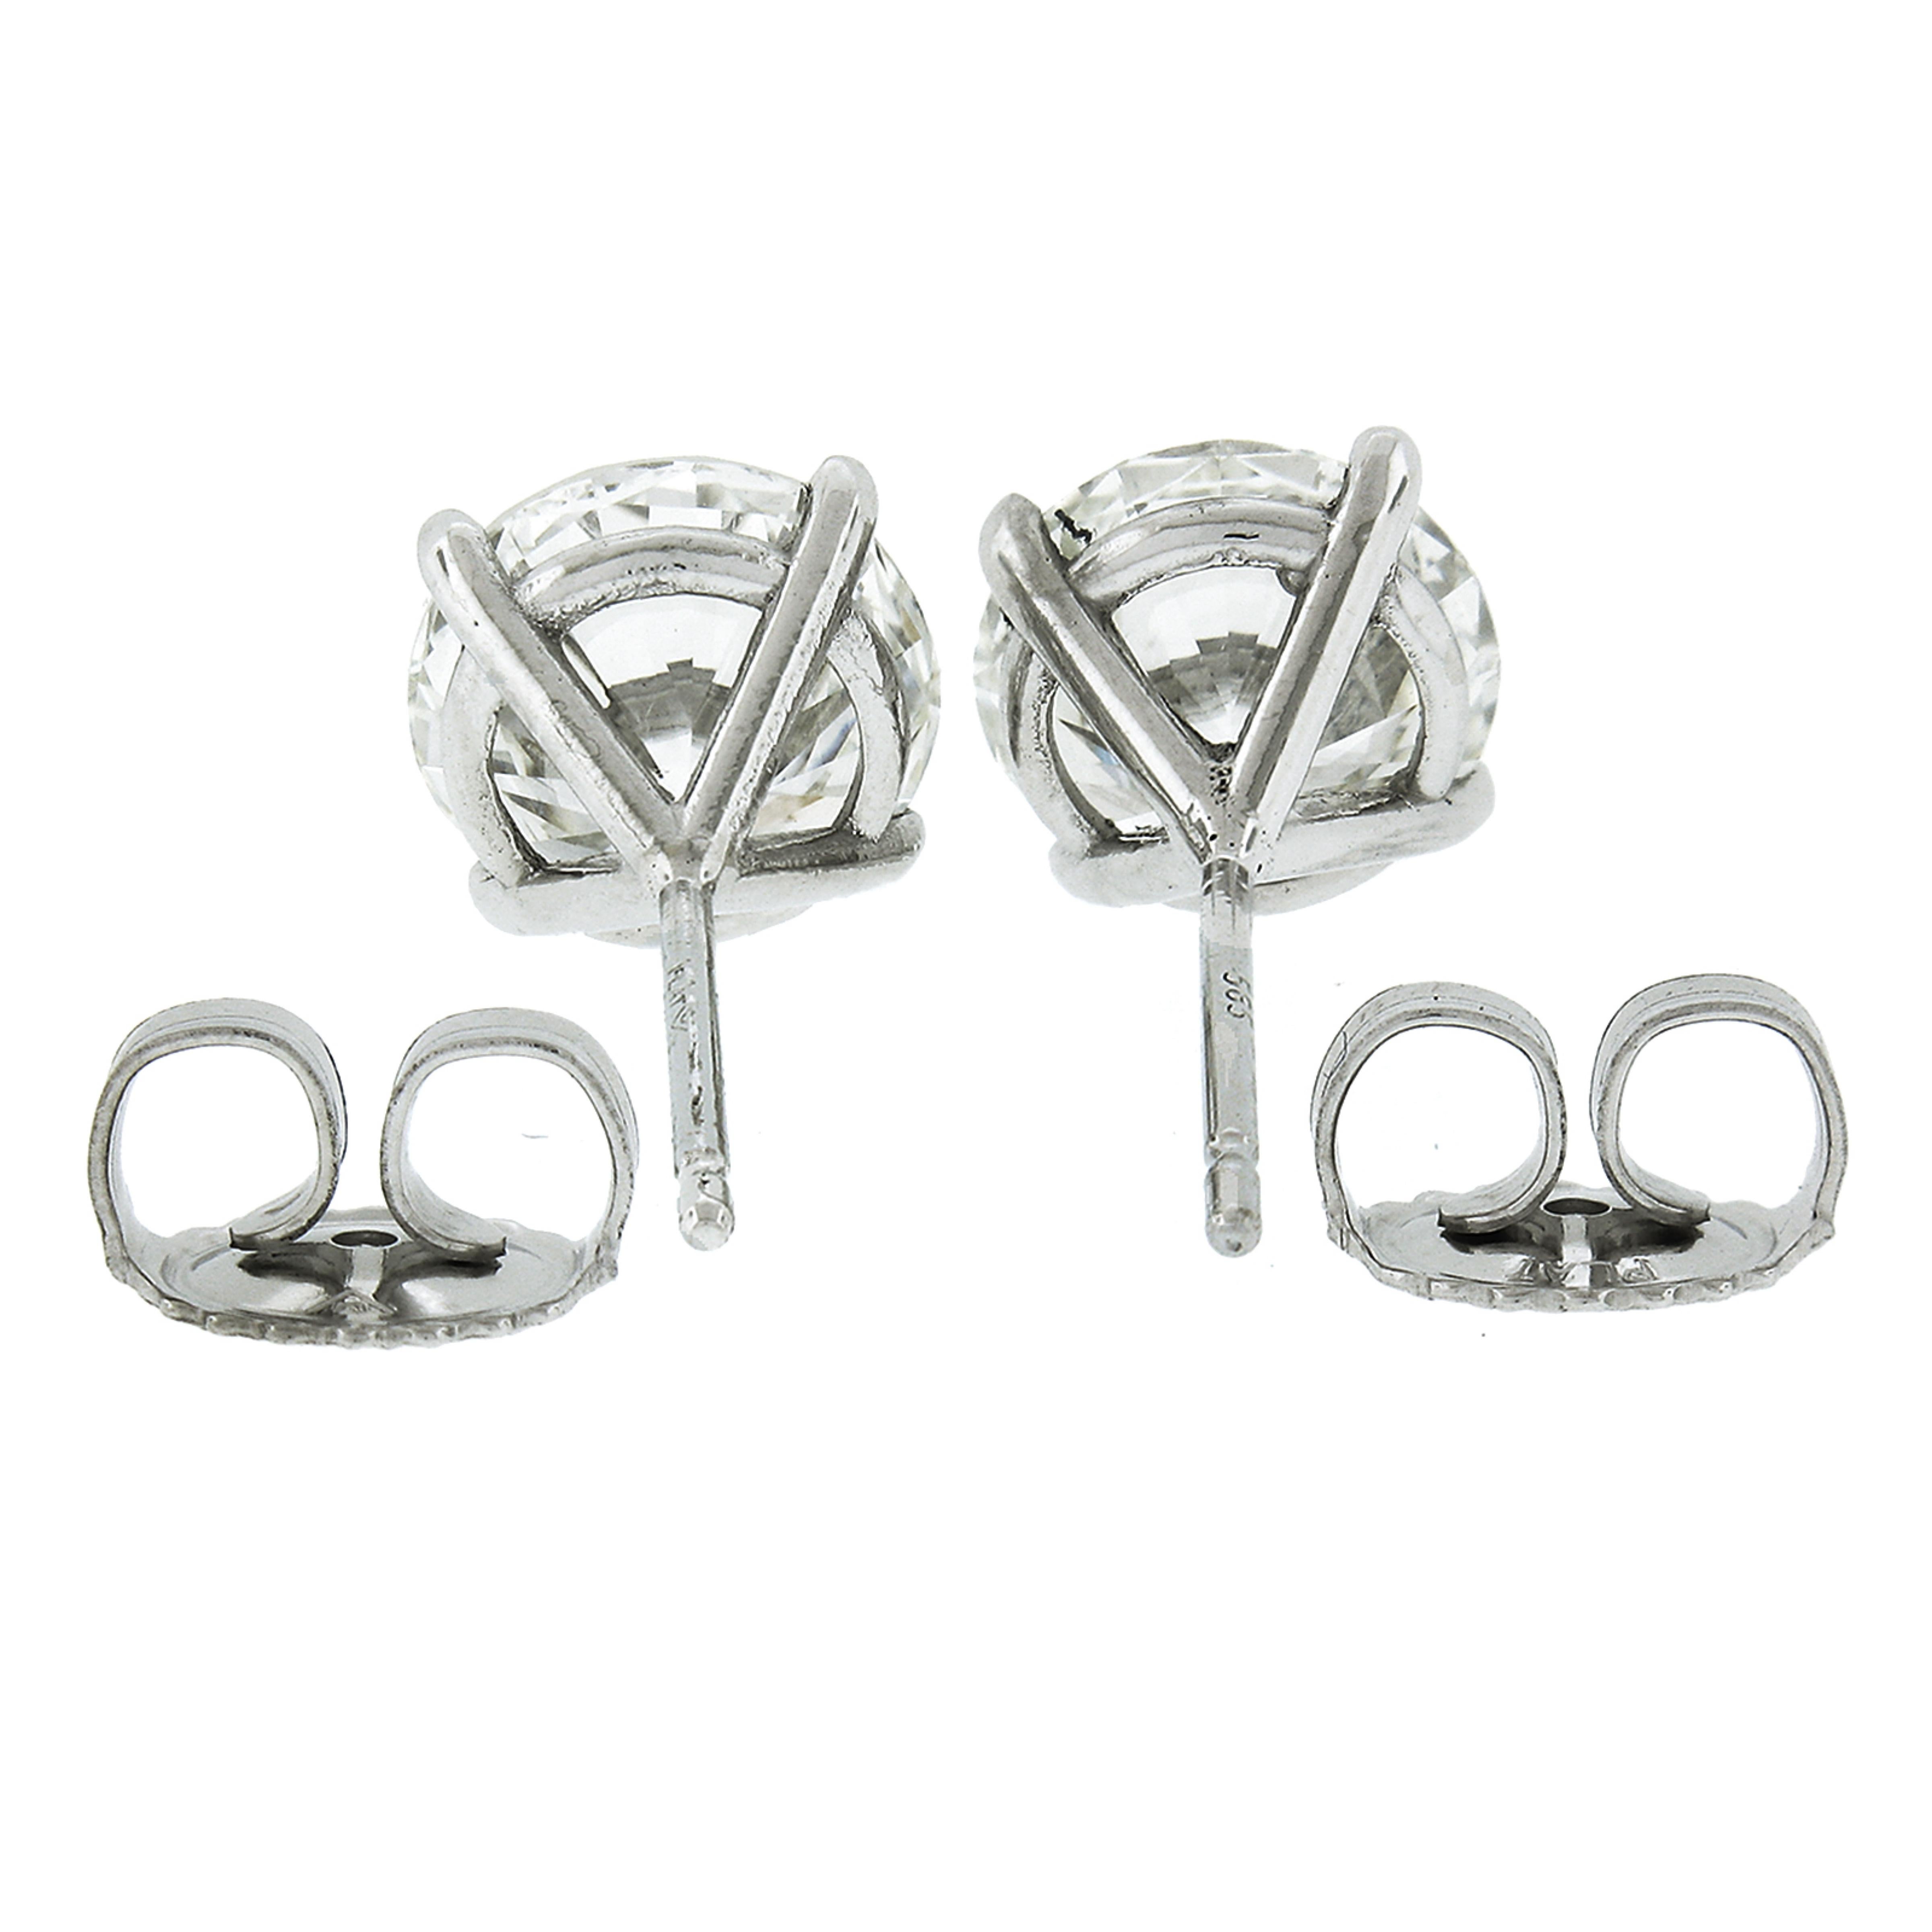 Round Cut NEW Platinum 3.06ctw GIA Round Brilliant Diamond Martini 4 Prong Stud Earrings For Sale